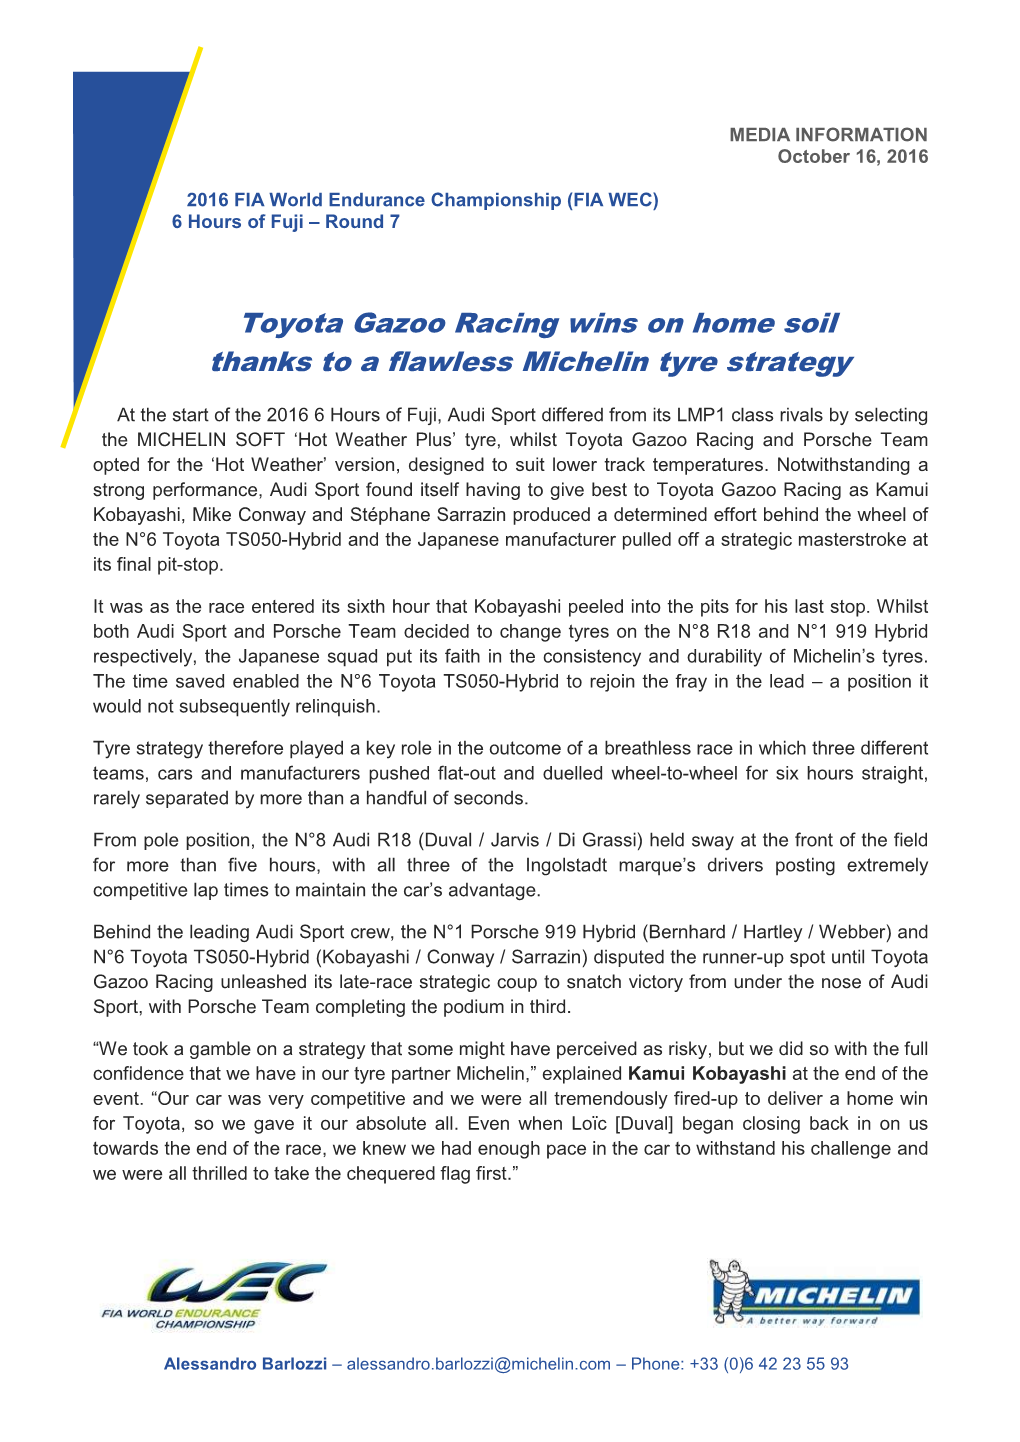 Toyota Gazoo Racing Wins on Home Soil Thanks to a Flawless Michelin Tyre Strategy